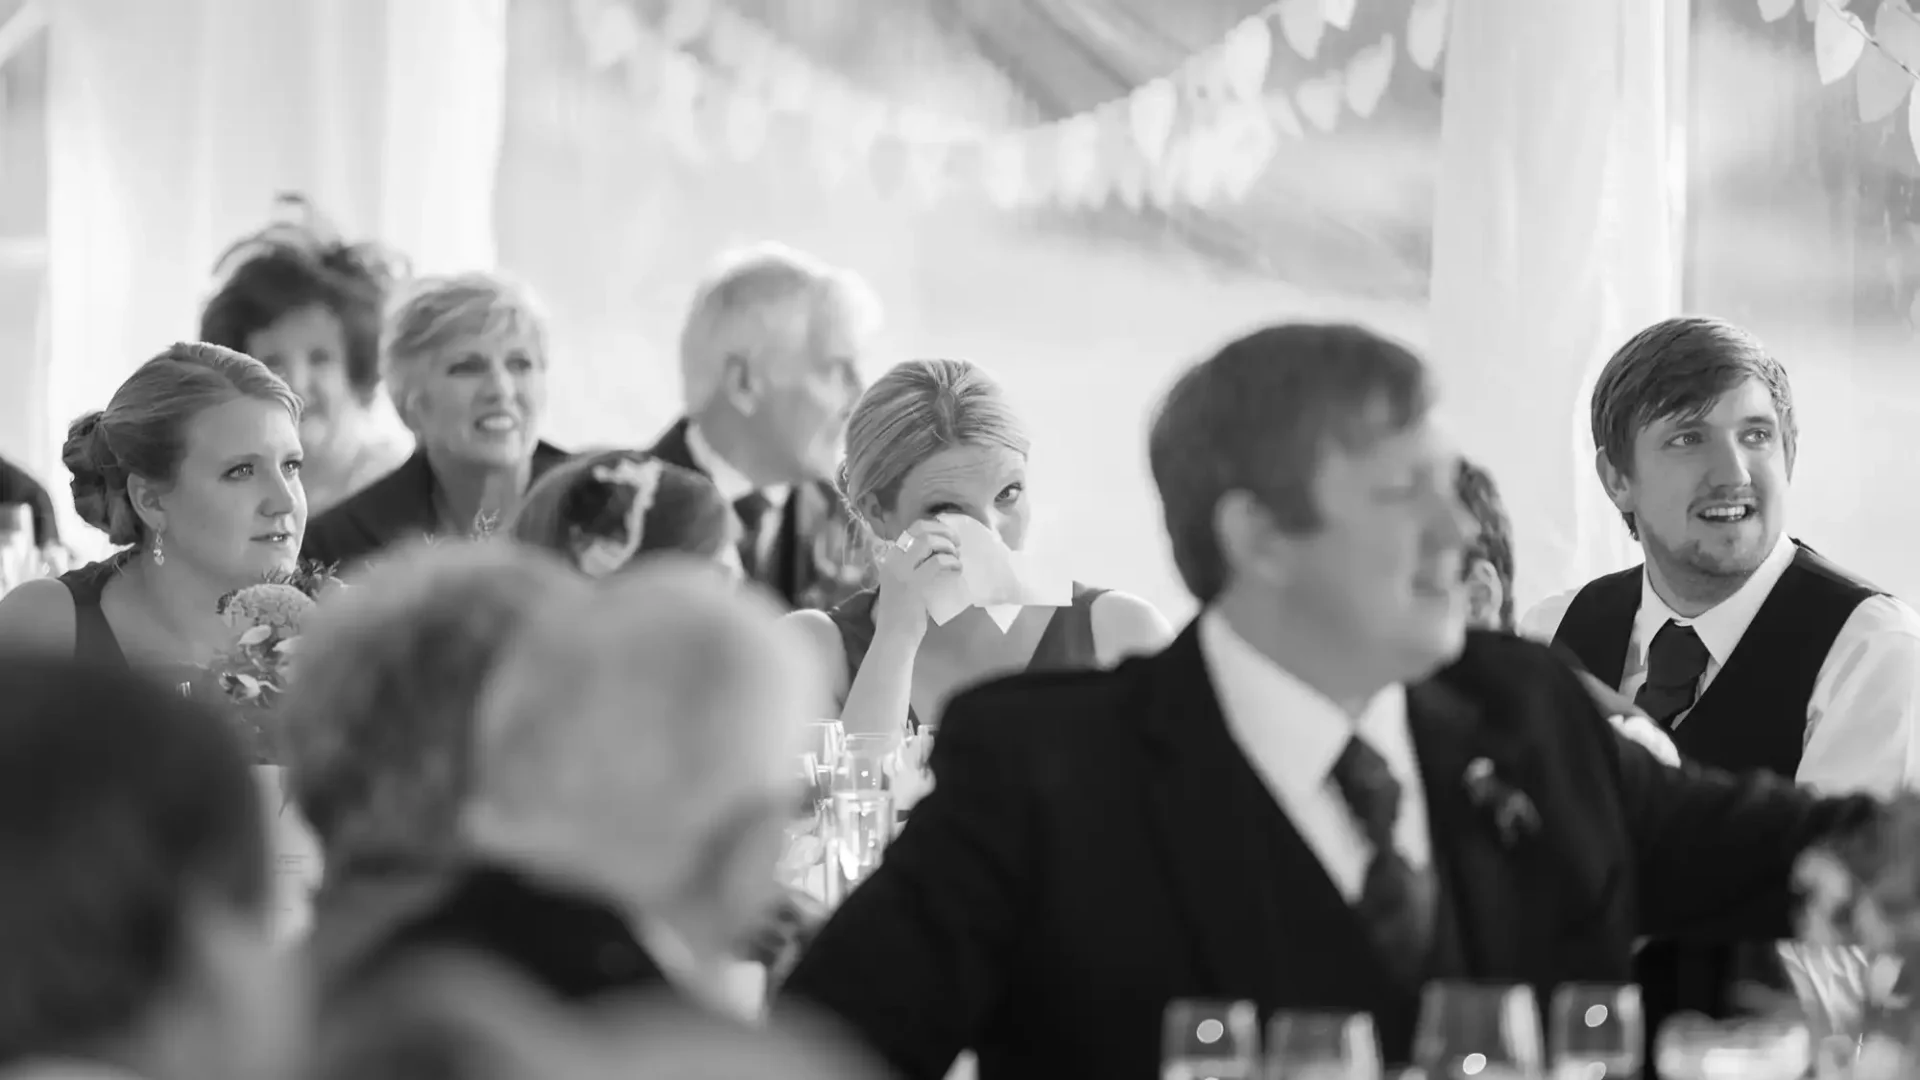 Black and white photo of guests sitting at a table during a wedding reception, capturing various expressions and interactions.